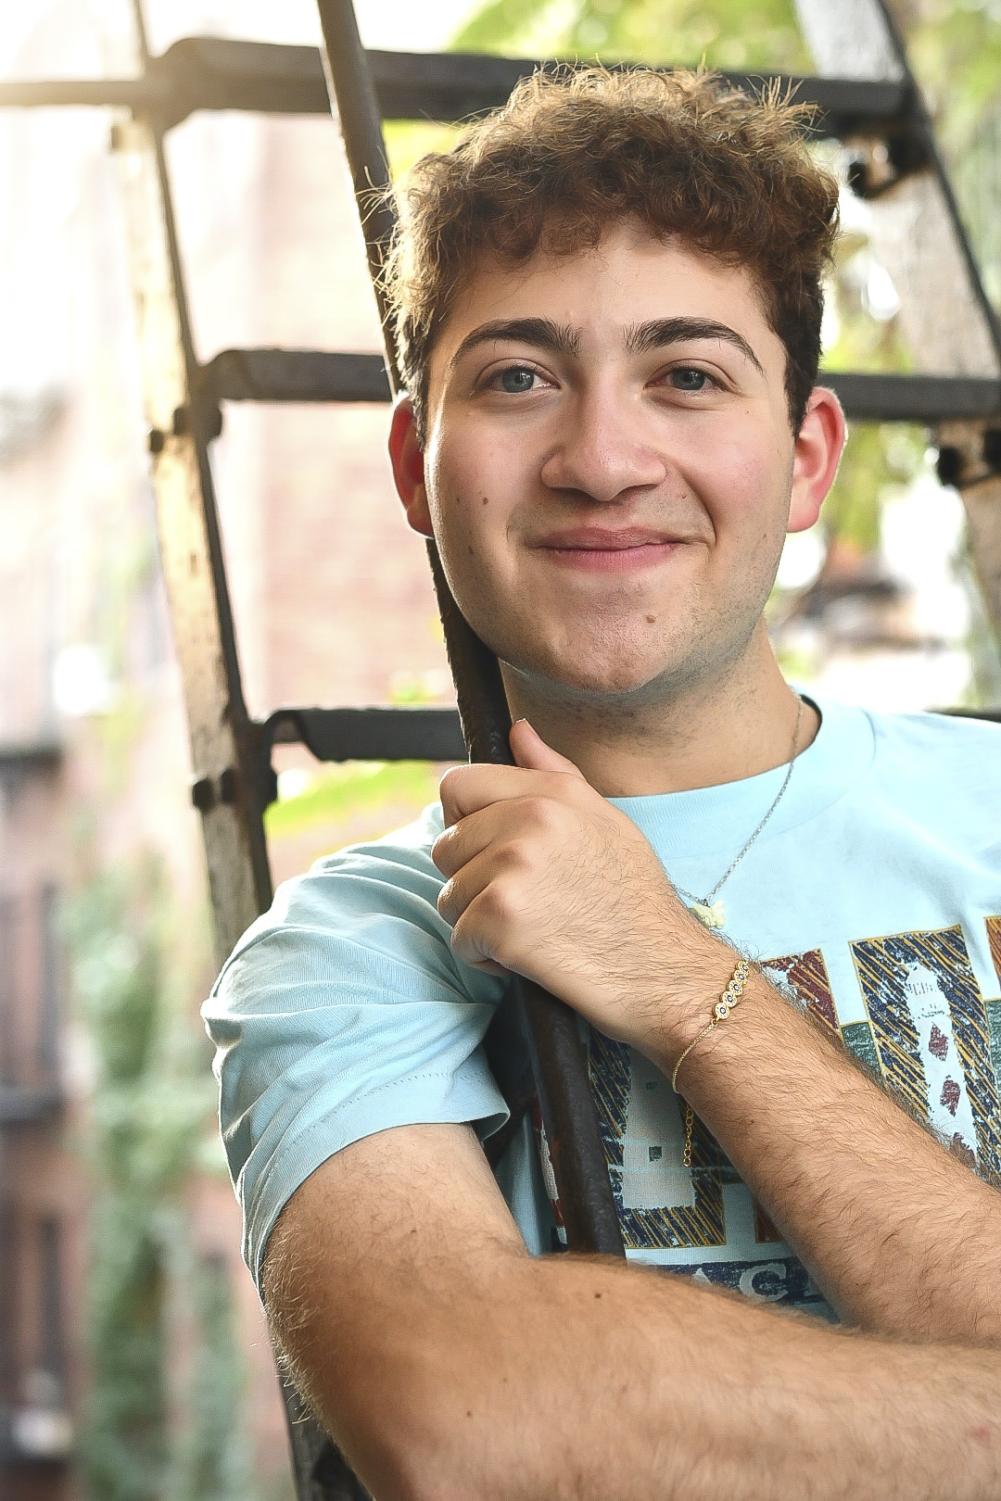 Ryan Wasserman, a Tisch student majoring in theater, poses for the camera on a fire escape wearing a blue t-shirt.